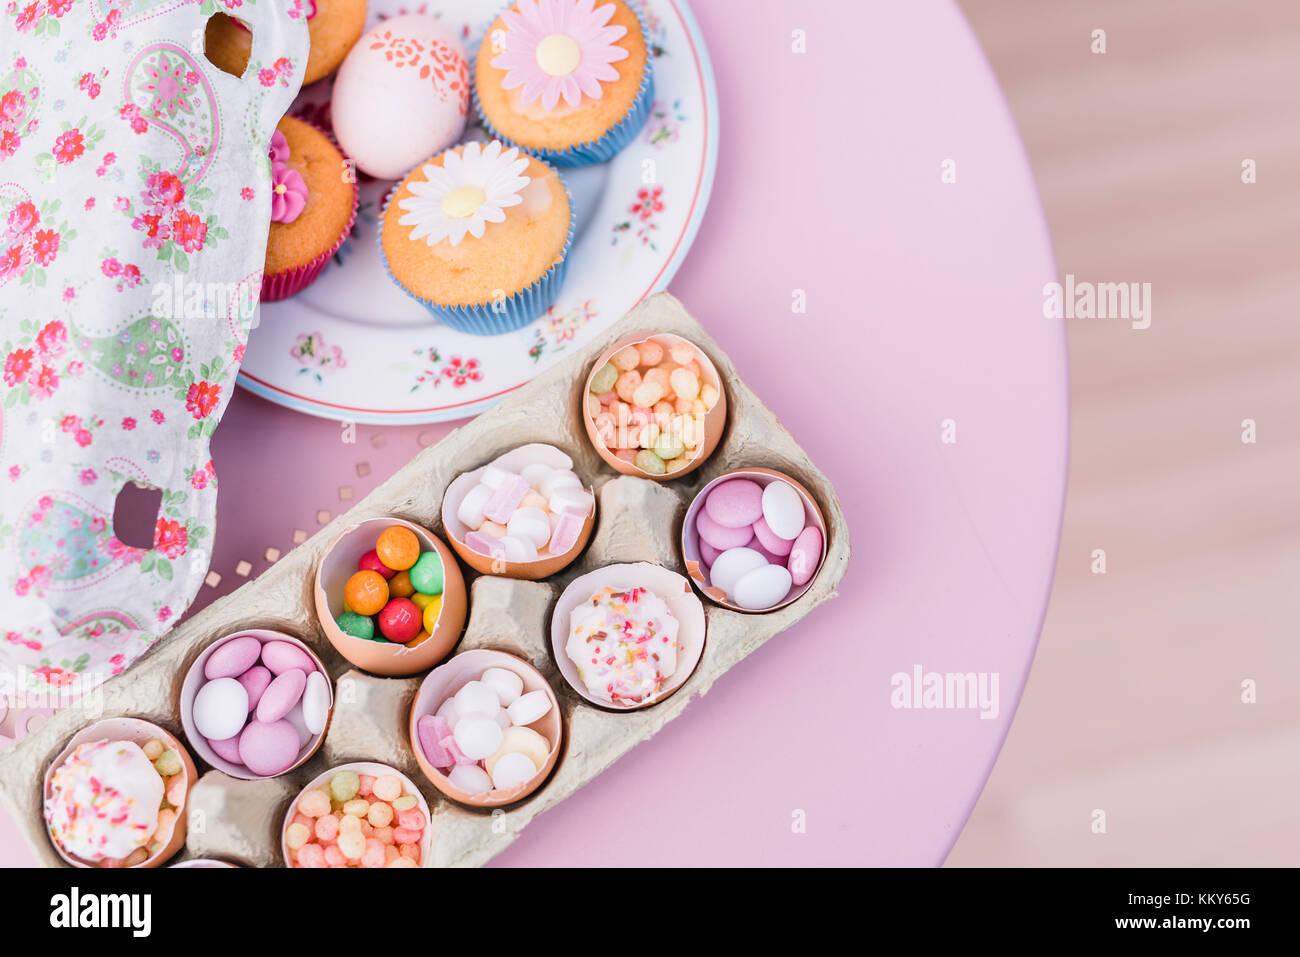 Eggshells filled with sweets, still life Stock Photo